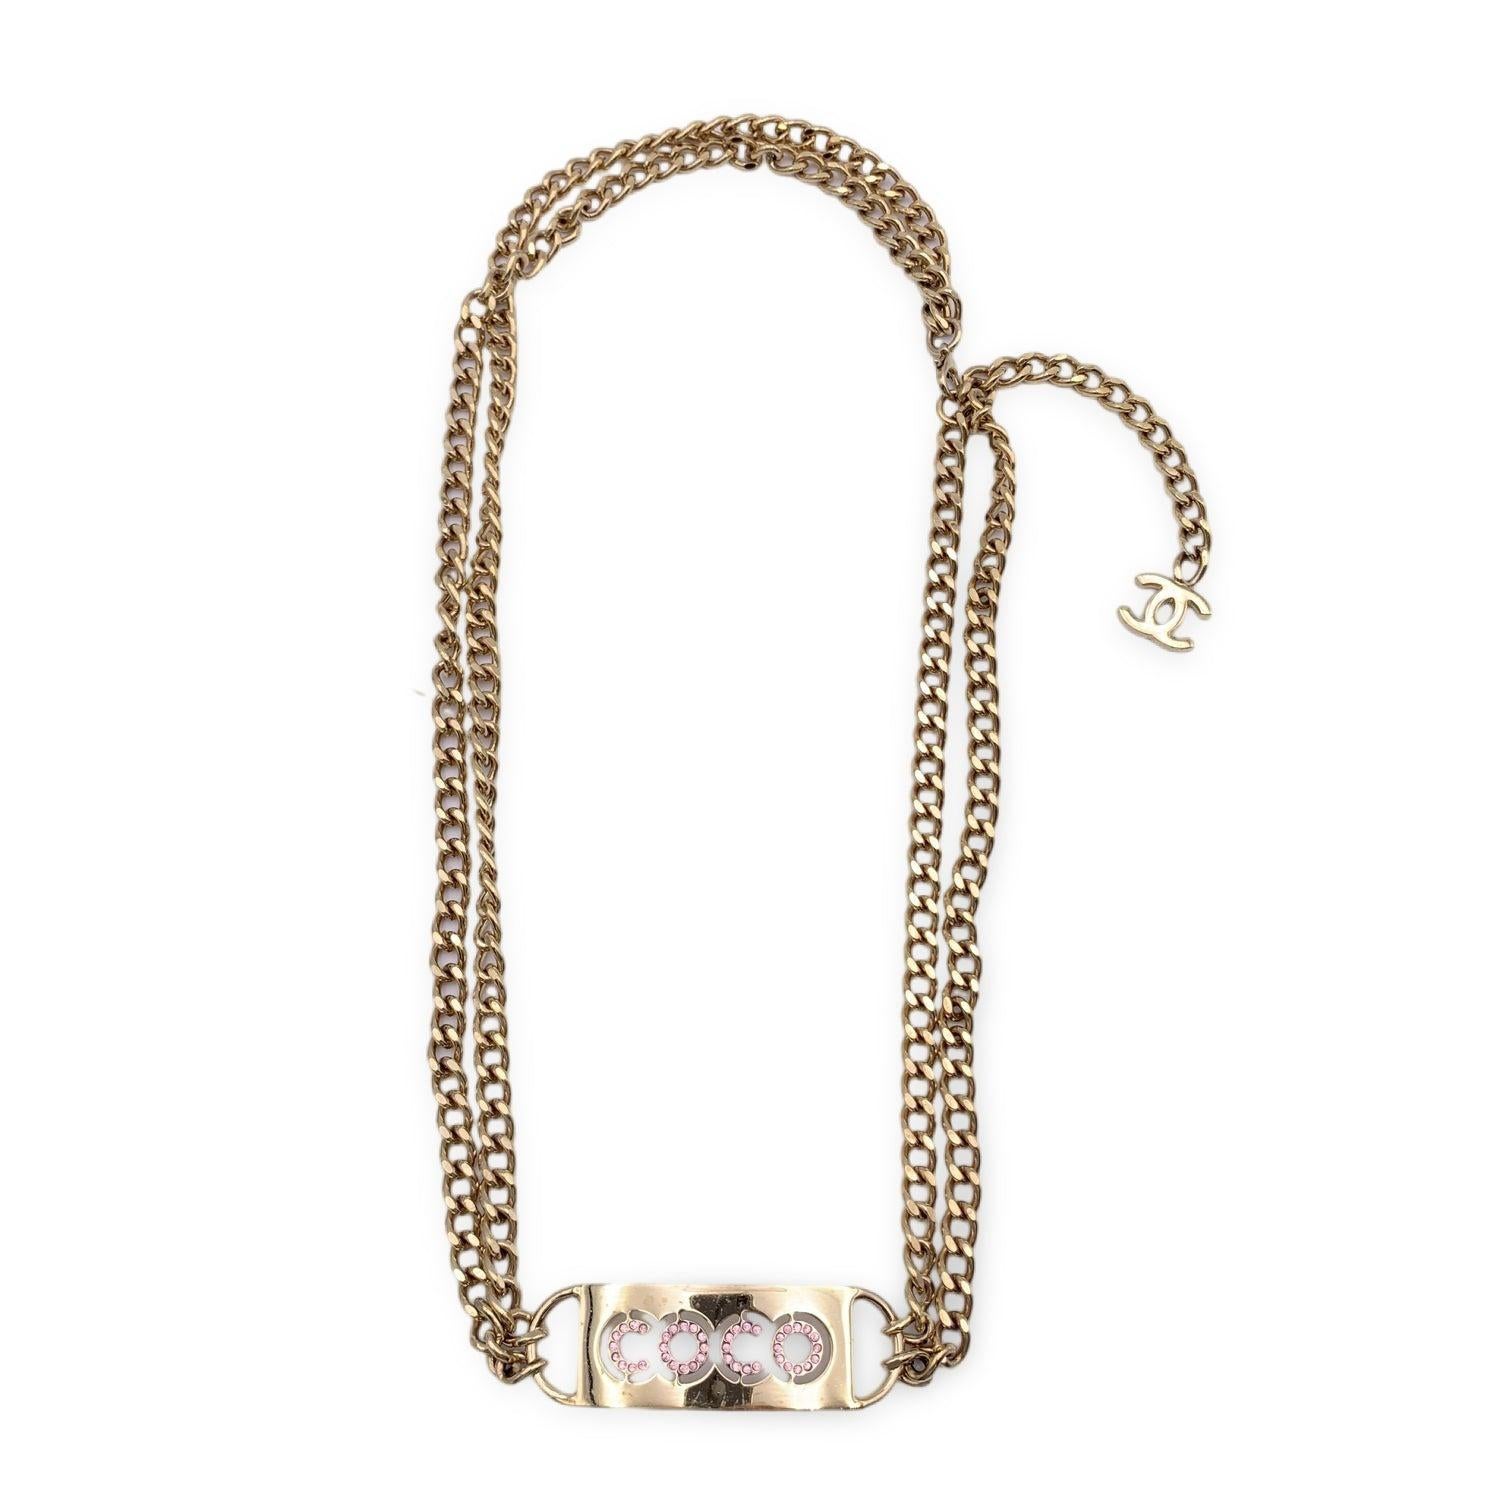 Chanel heavy gold metal chain belt . Period/Era: 2002. It is very versatile and will complete every look (you can use it as a necklace or as a belt). It features a rectangular tab with crystals COCO signature in the center. Lobster closure. Total